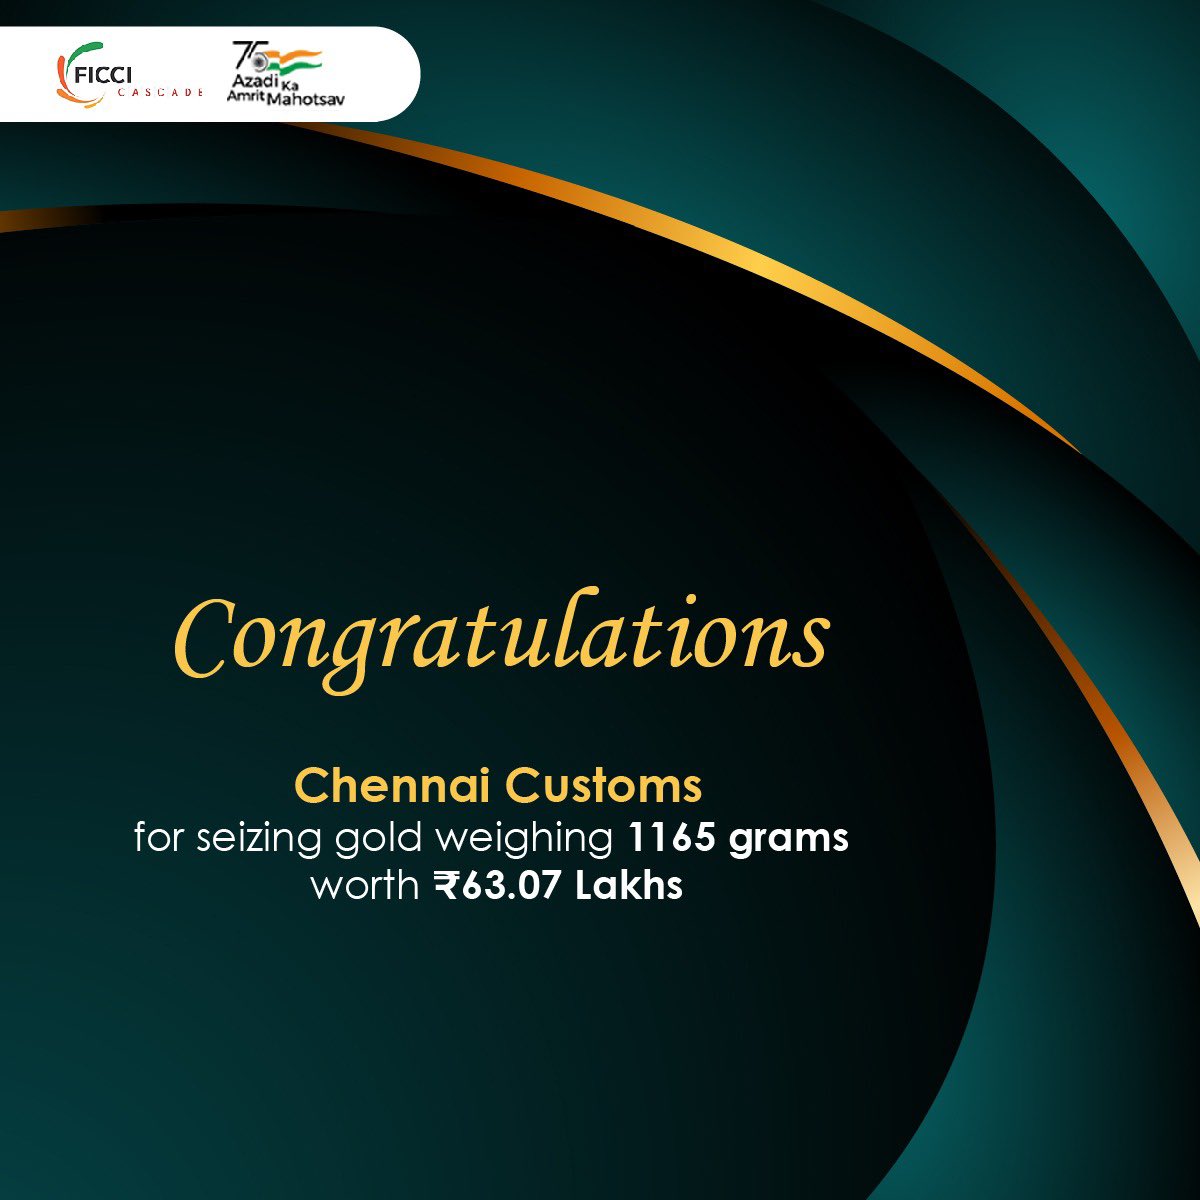 We congratulate @ChennaiCustoms for confiscating gold bars of 24k purity gold valued at ₹63.07 Lakhs.

Real-time exchange of data is paramount for enforcement officials to swiftly act upon suspected cases. 

#IndianCustomsAtWork
#IndianEnforcementAtWork
@cbic_india @mkstalin